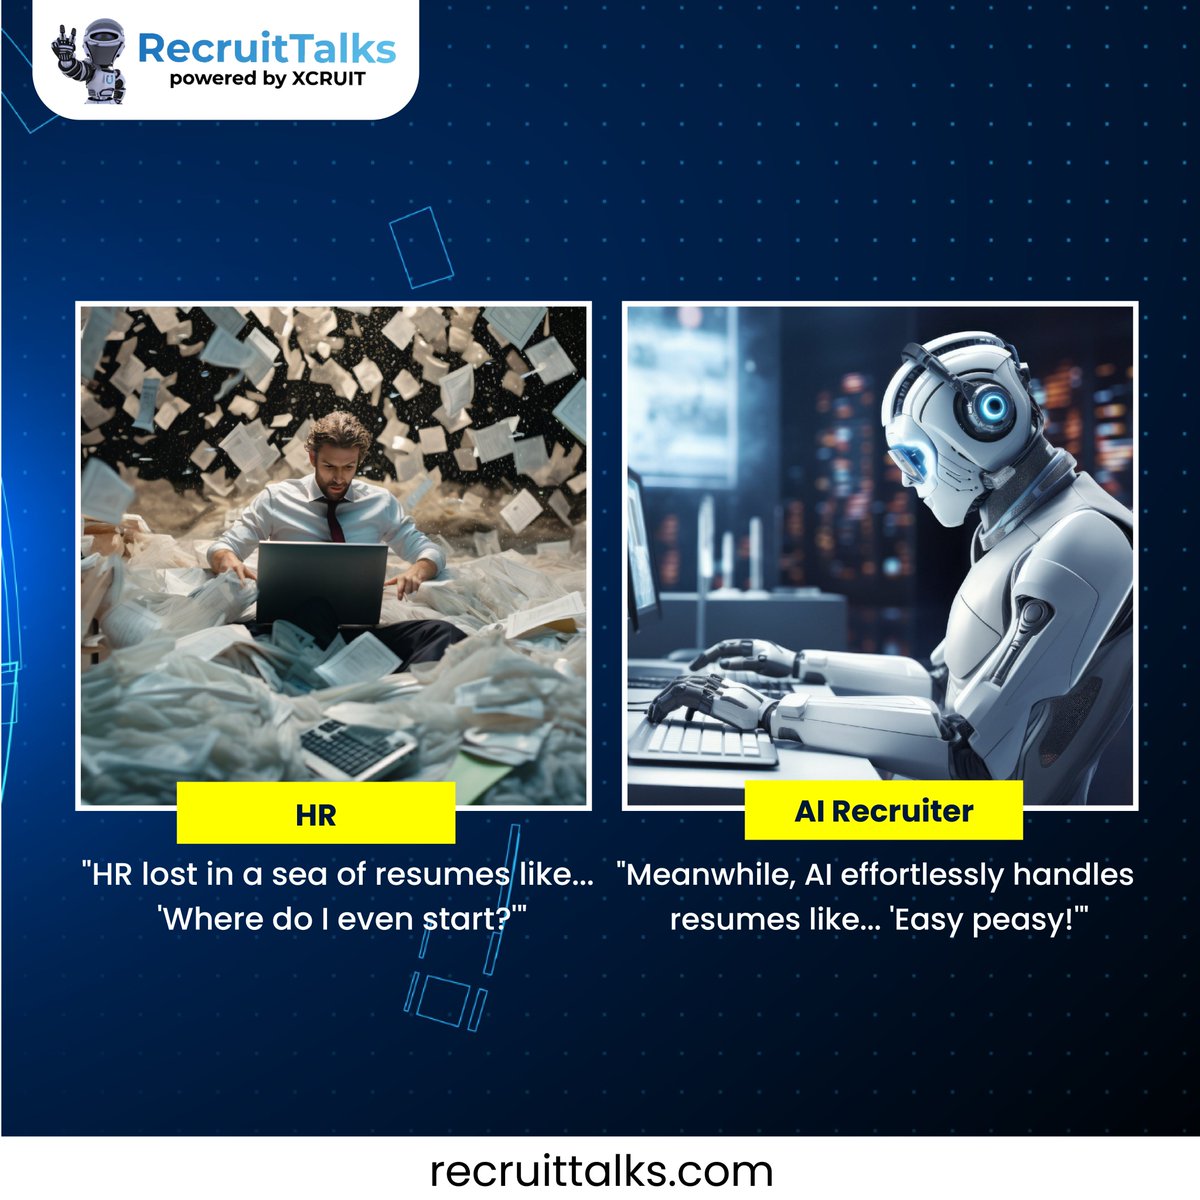 Looks like HR is drowning in resumes while AI's just surfing through them with ease!
.
.
#Recruitorr #IamRecruitorr #MemesDaily #Memesforyou #ArtificialIntelligence